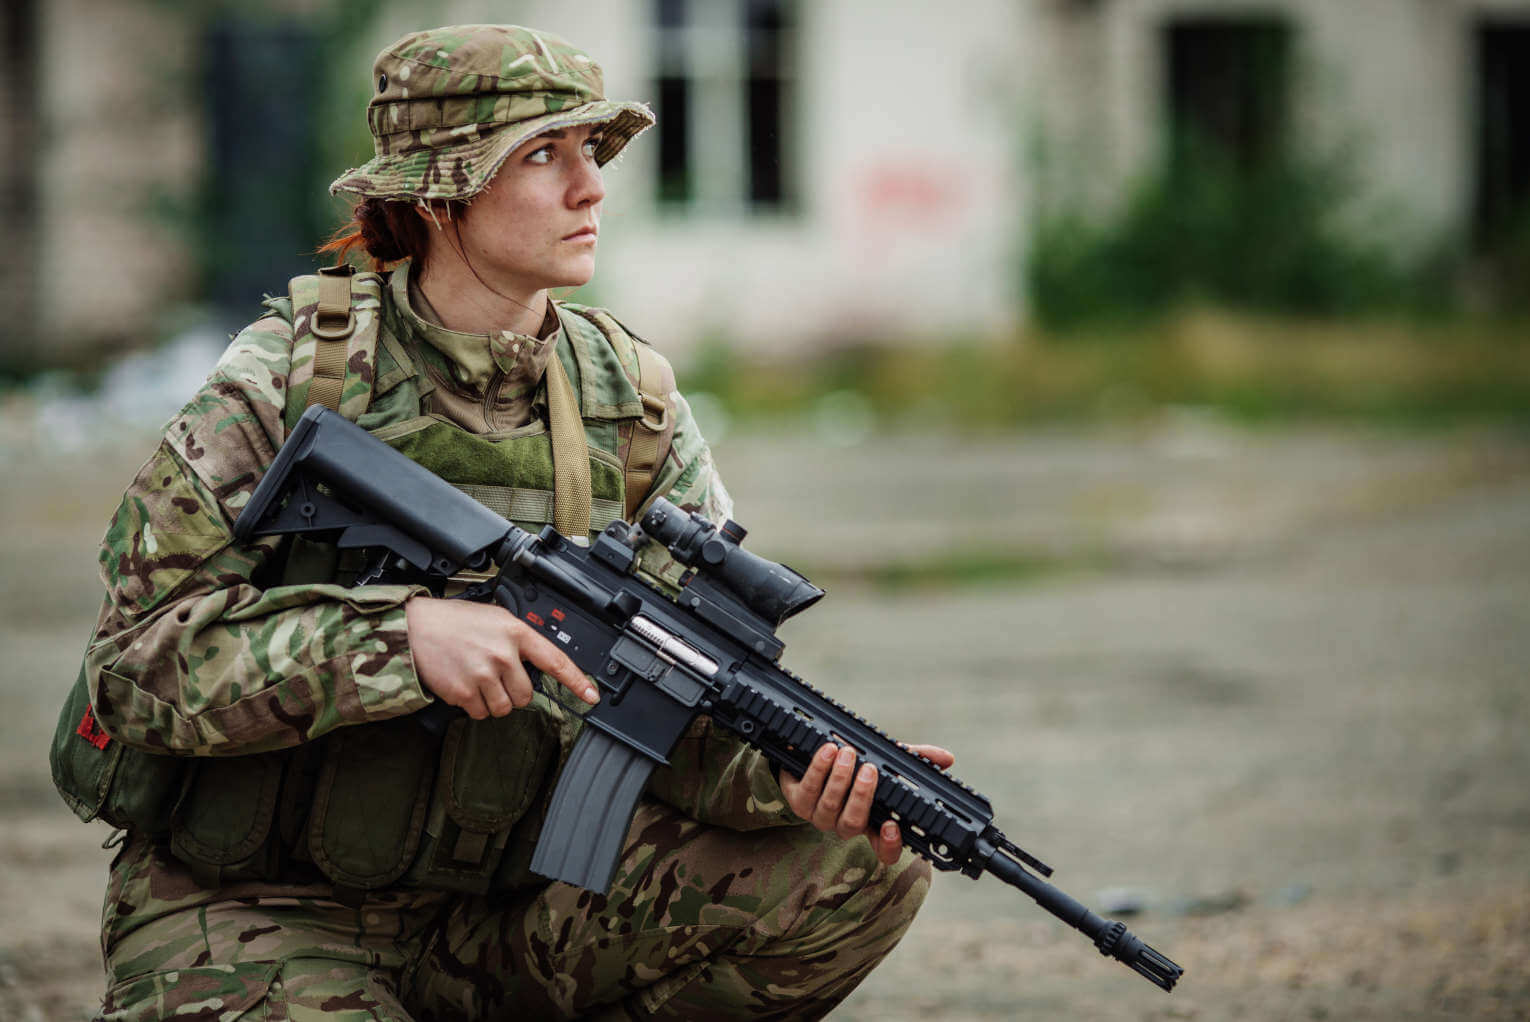 Should Women Join Men in the Military Draft?